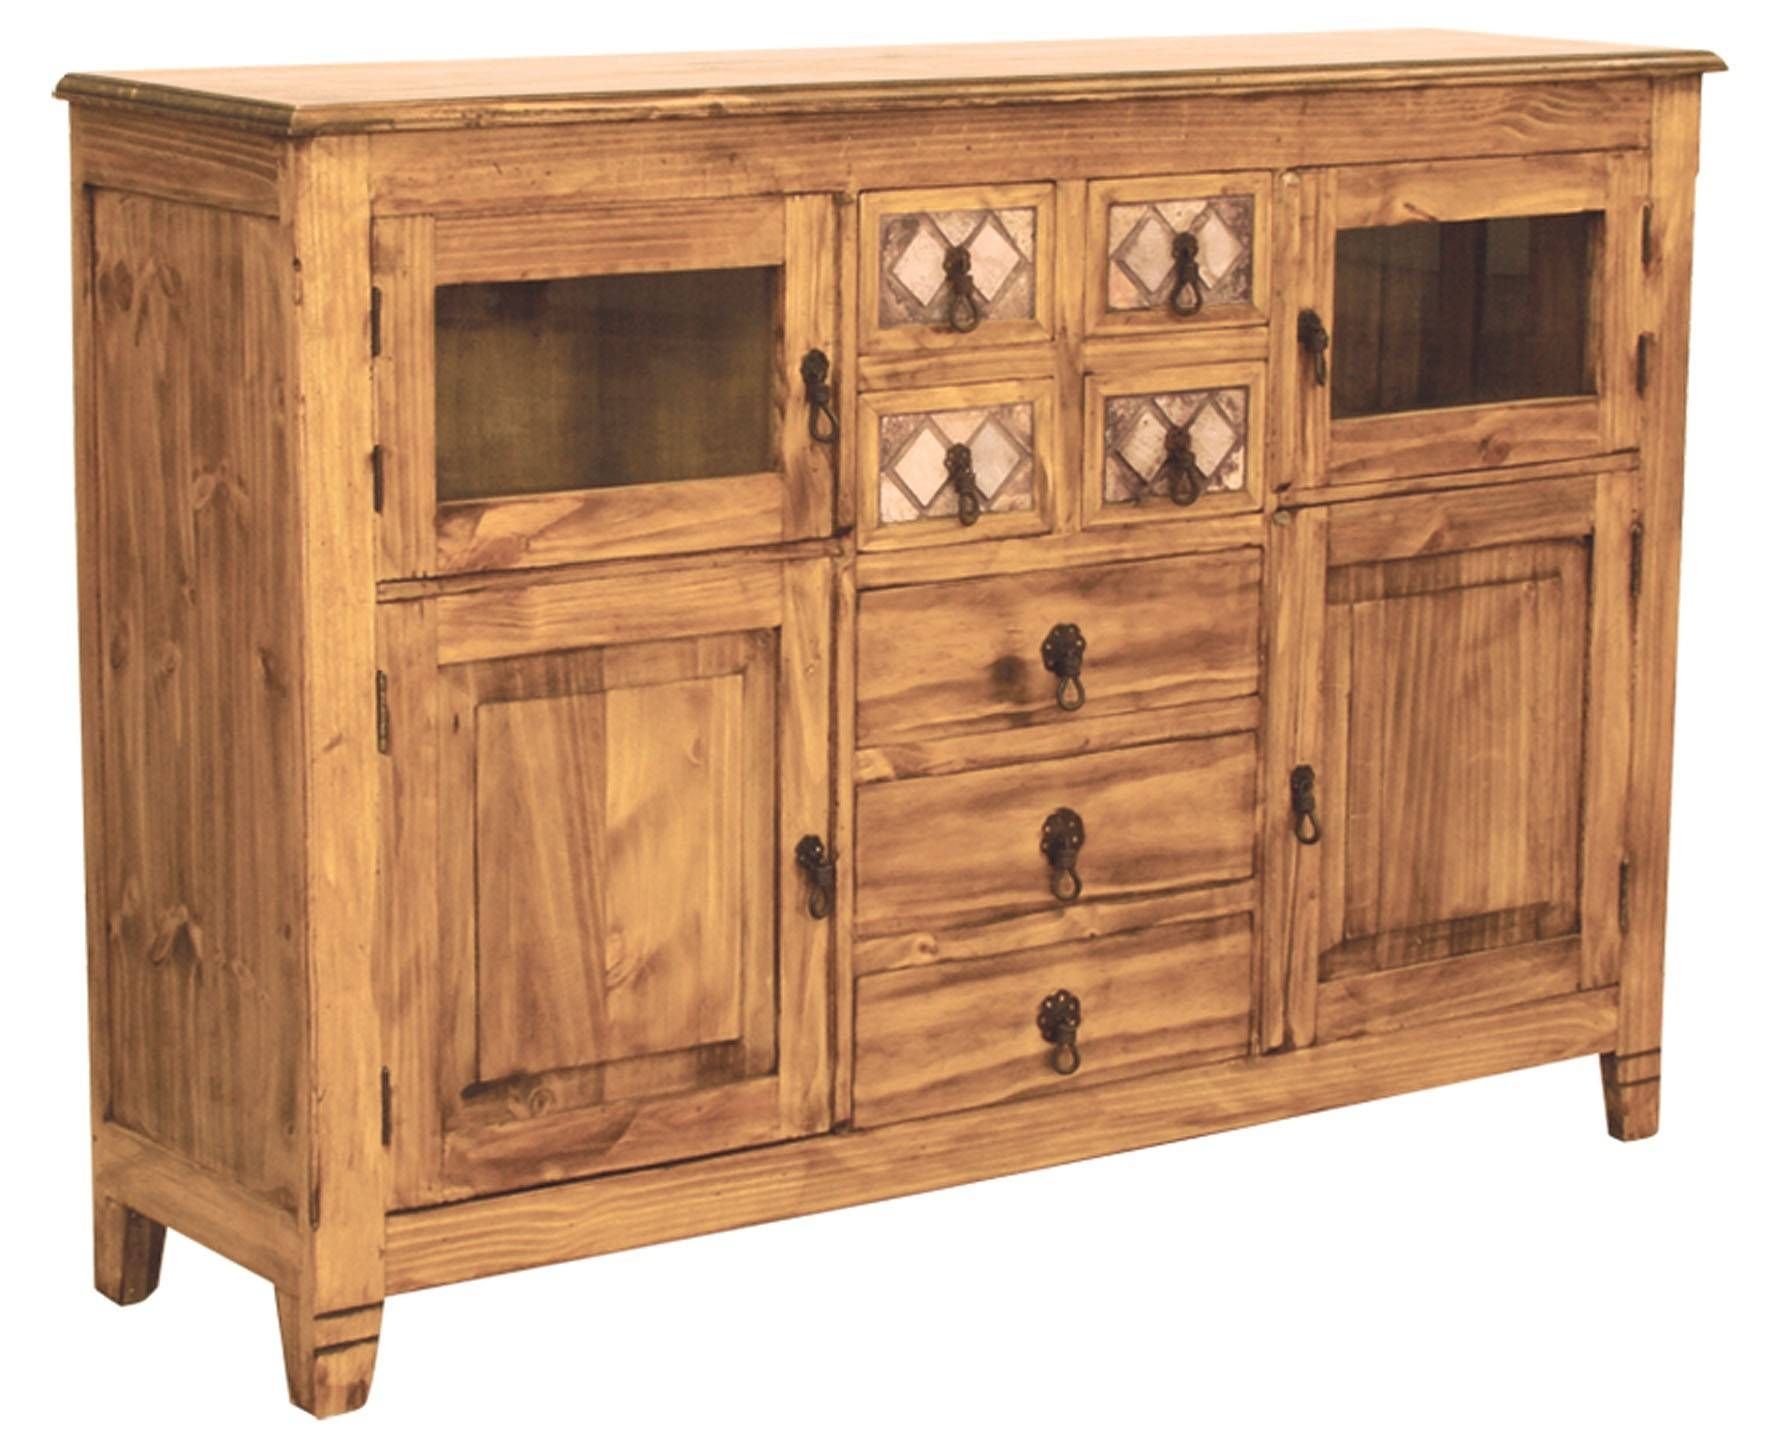 Mexican Pine Furniture | Decoration Access Throughout Current Mexican Pine Sideboards (View 14 of 15)